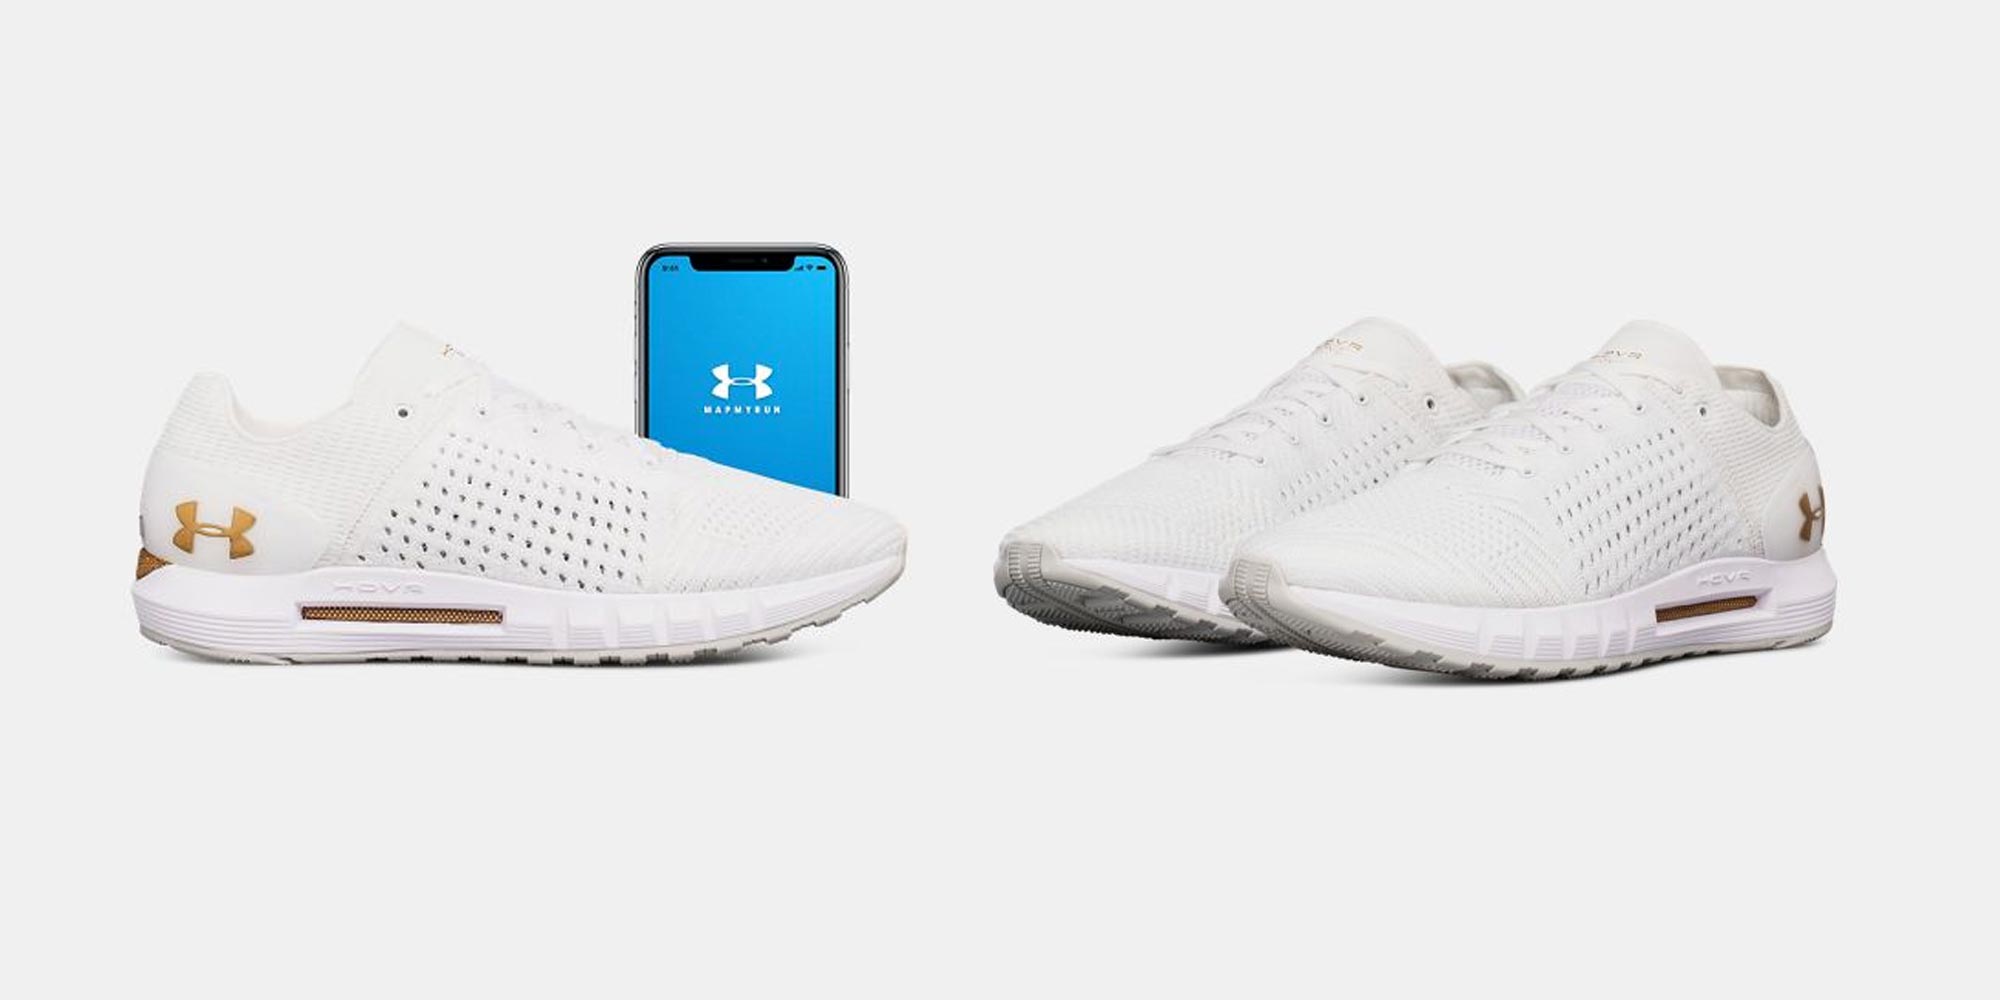 Resbaladizo Excluir Tercero Under Armour launches Hovr, a smart running shoe to track runs, pace, more